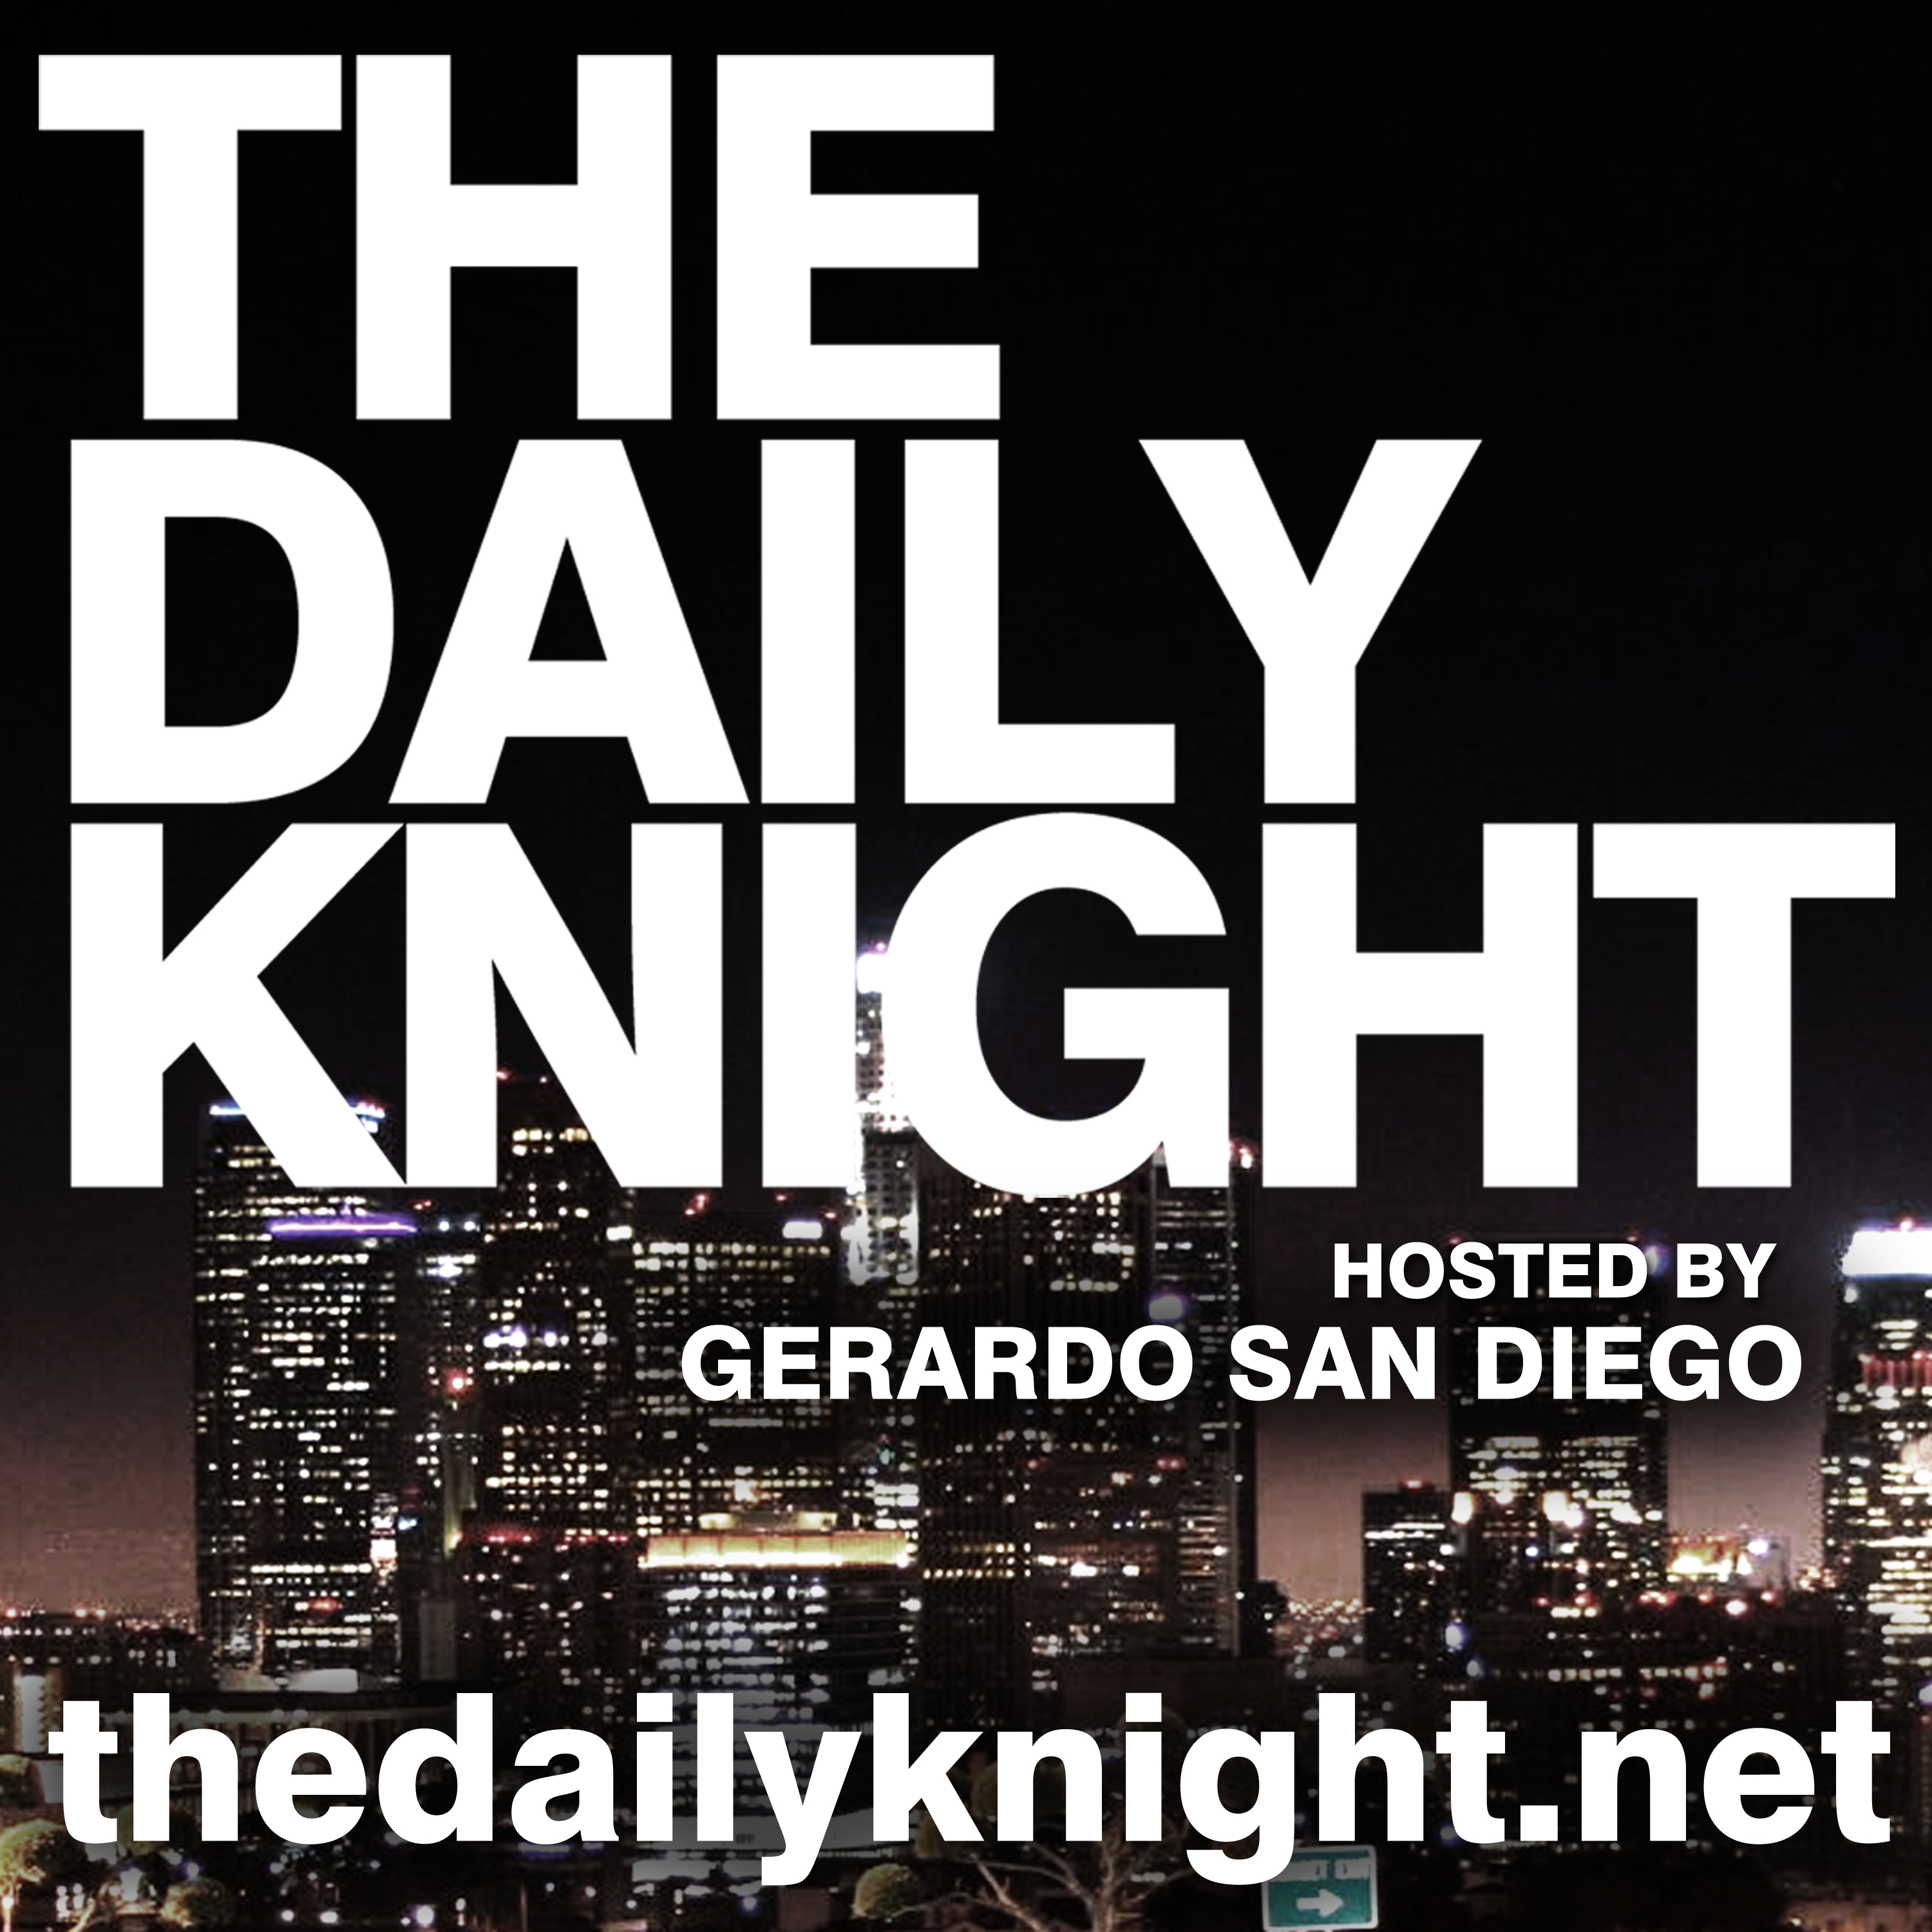 The Daily Knight